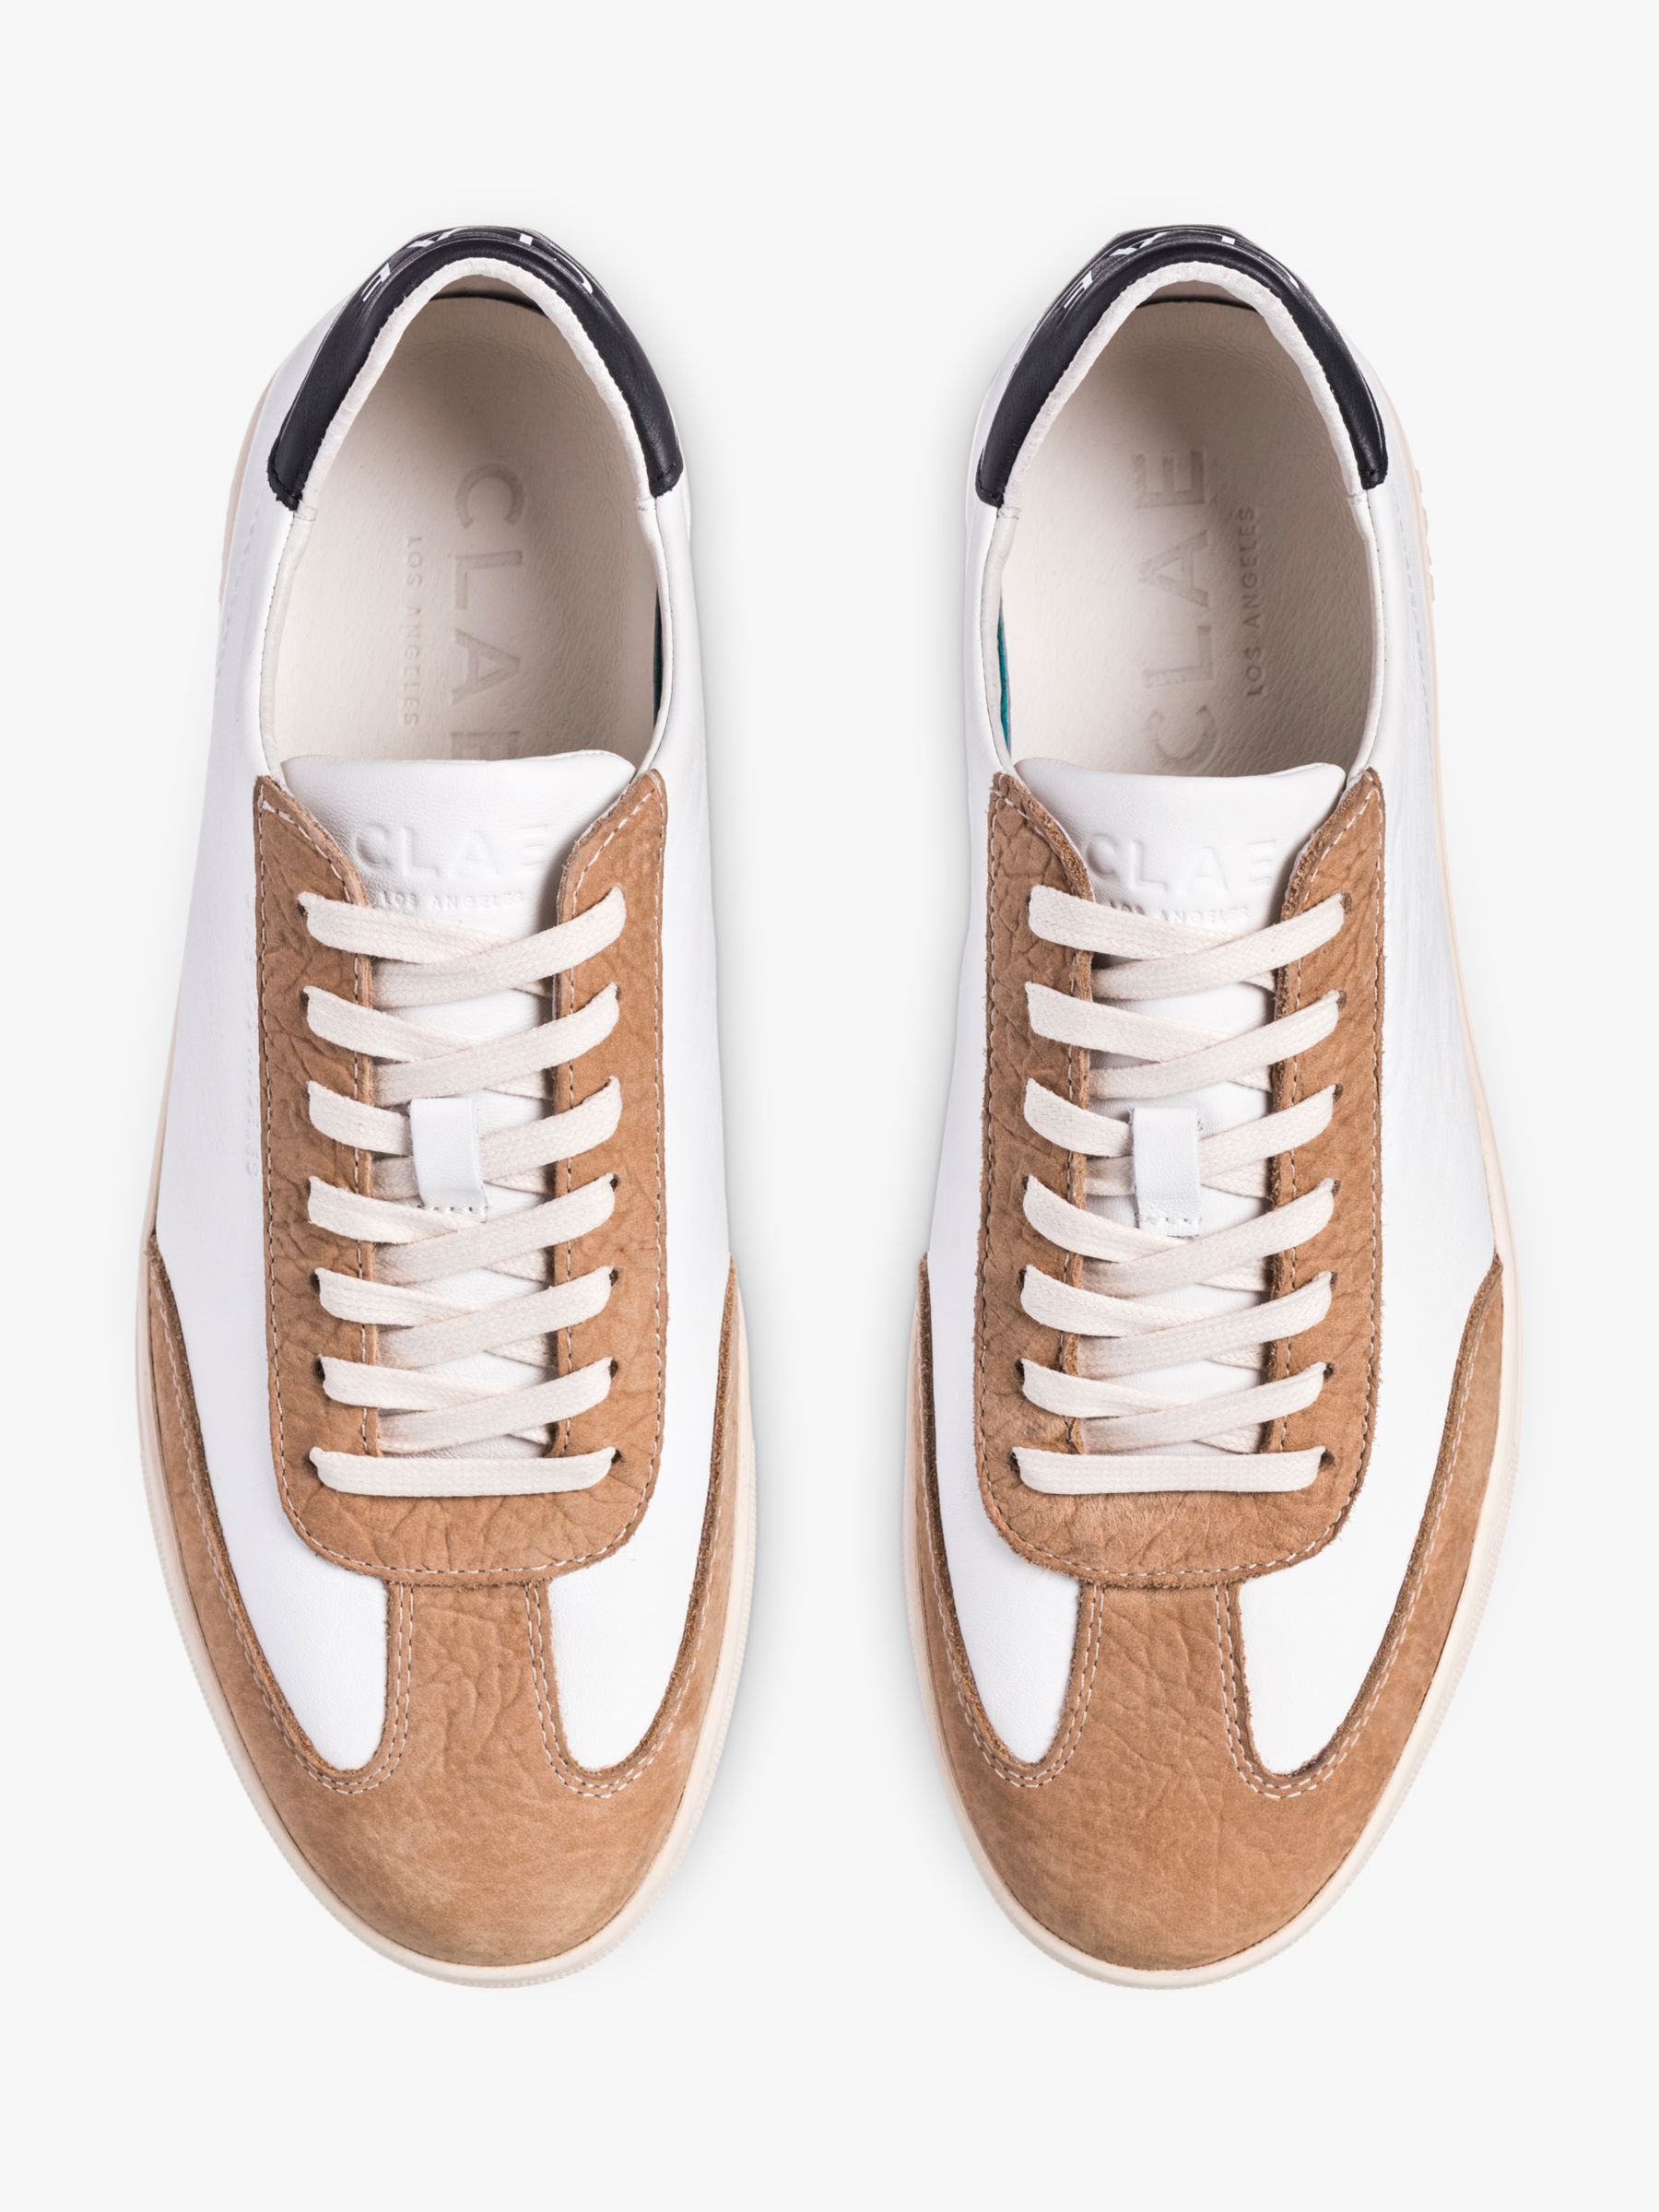 Buy CLAE Deane Leather Trainers Online at johnlewis.com